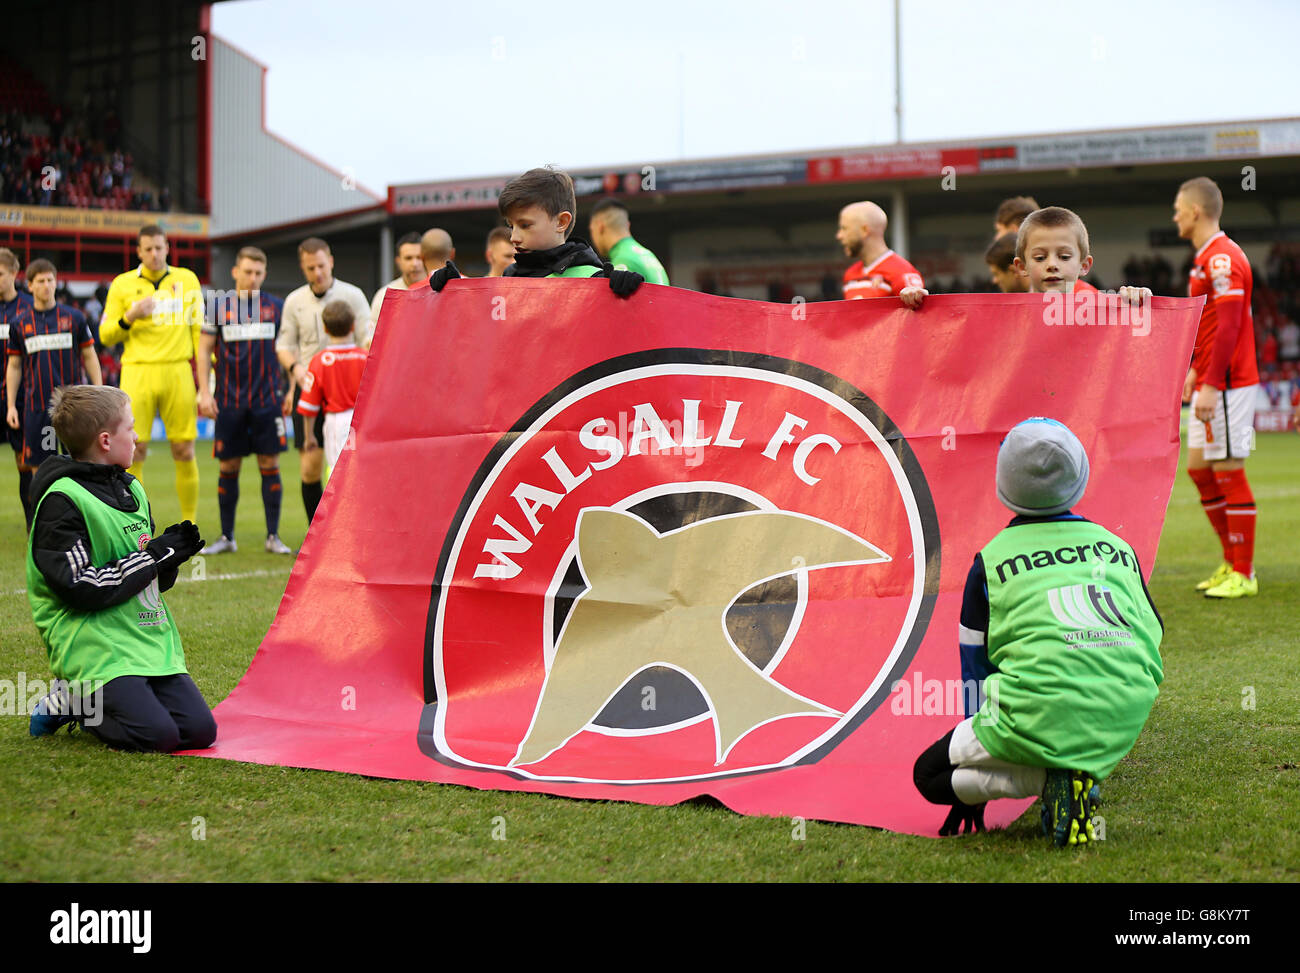 Walsall v Blackpool - Sky Bet League One - Banks's Stadium. Le mascotte hanno un banner Walsall FC. Foto Stock